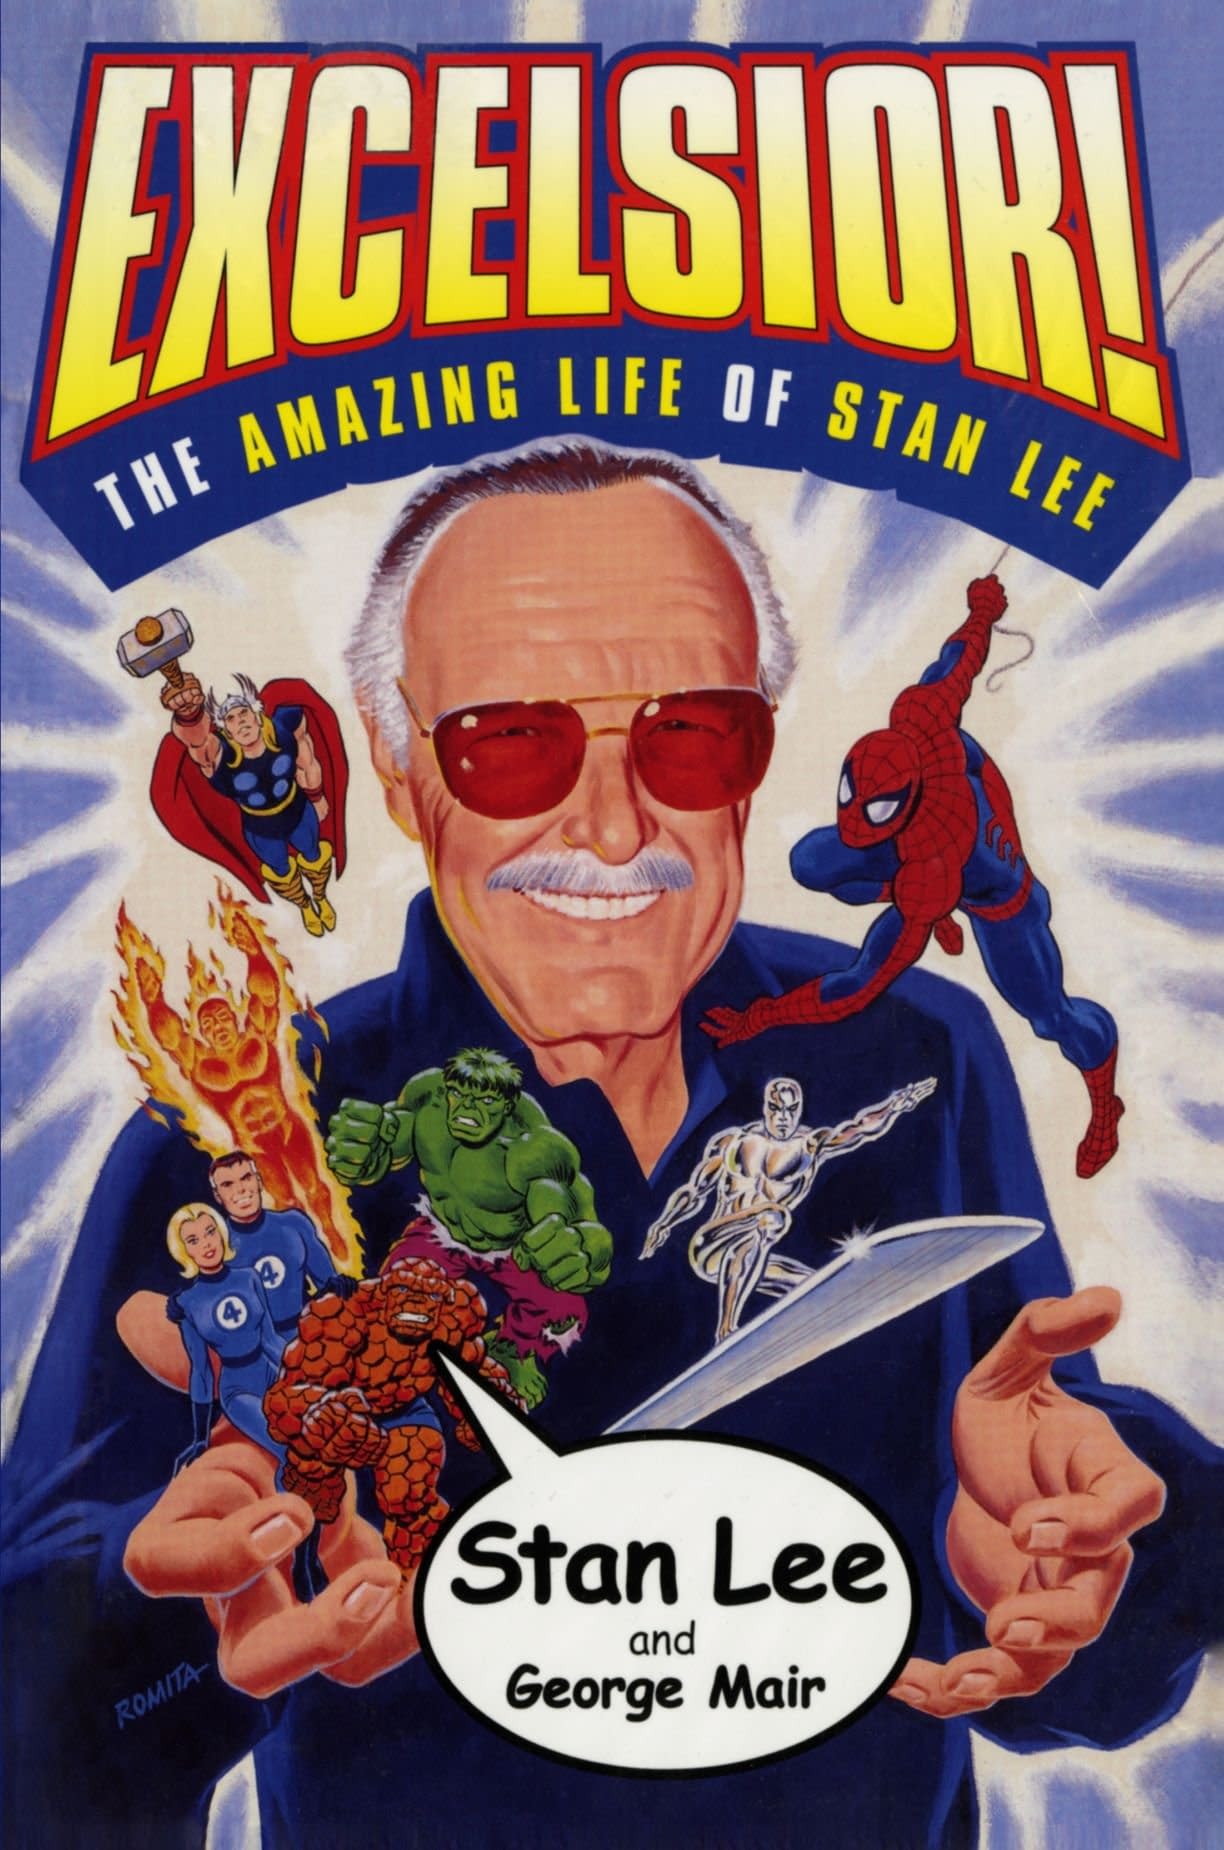 Marvel Comics Editorial Ban The Use Of Stan Lee's 